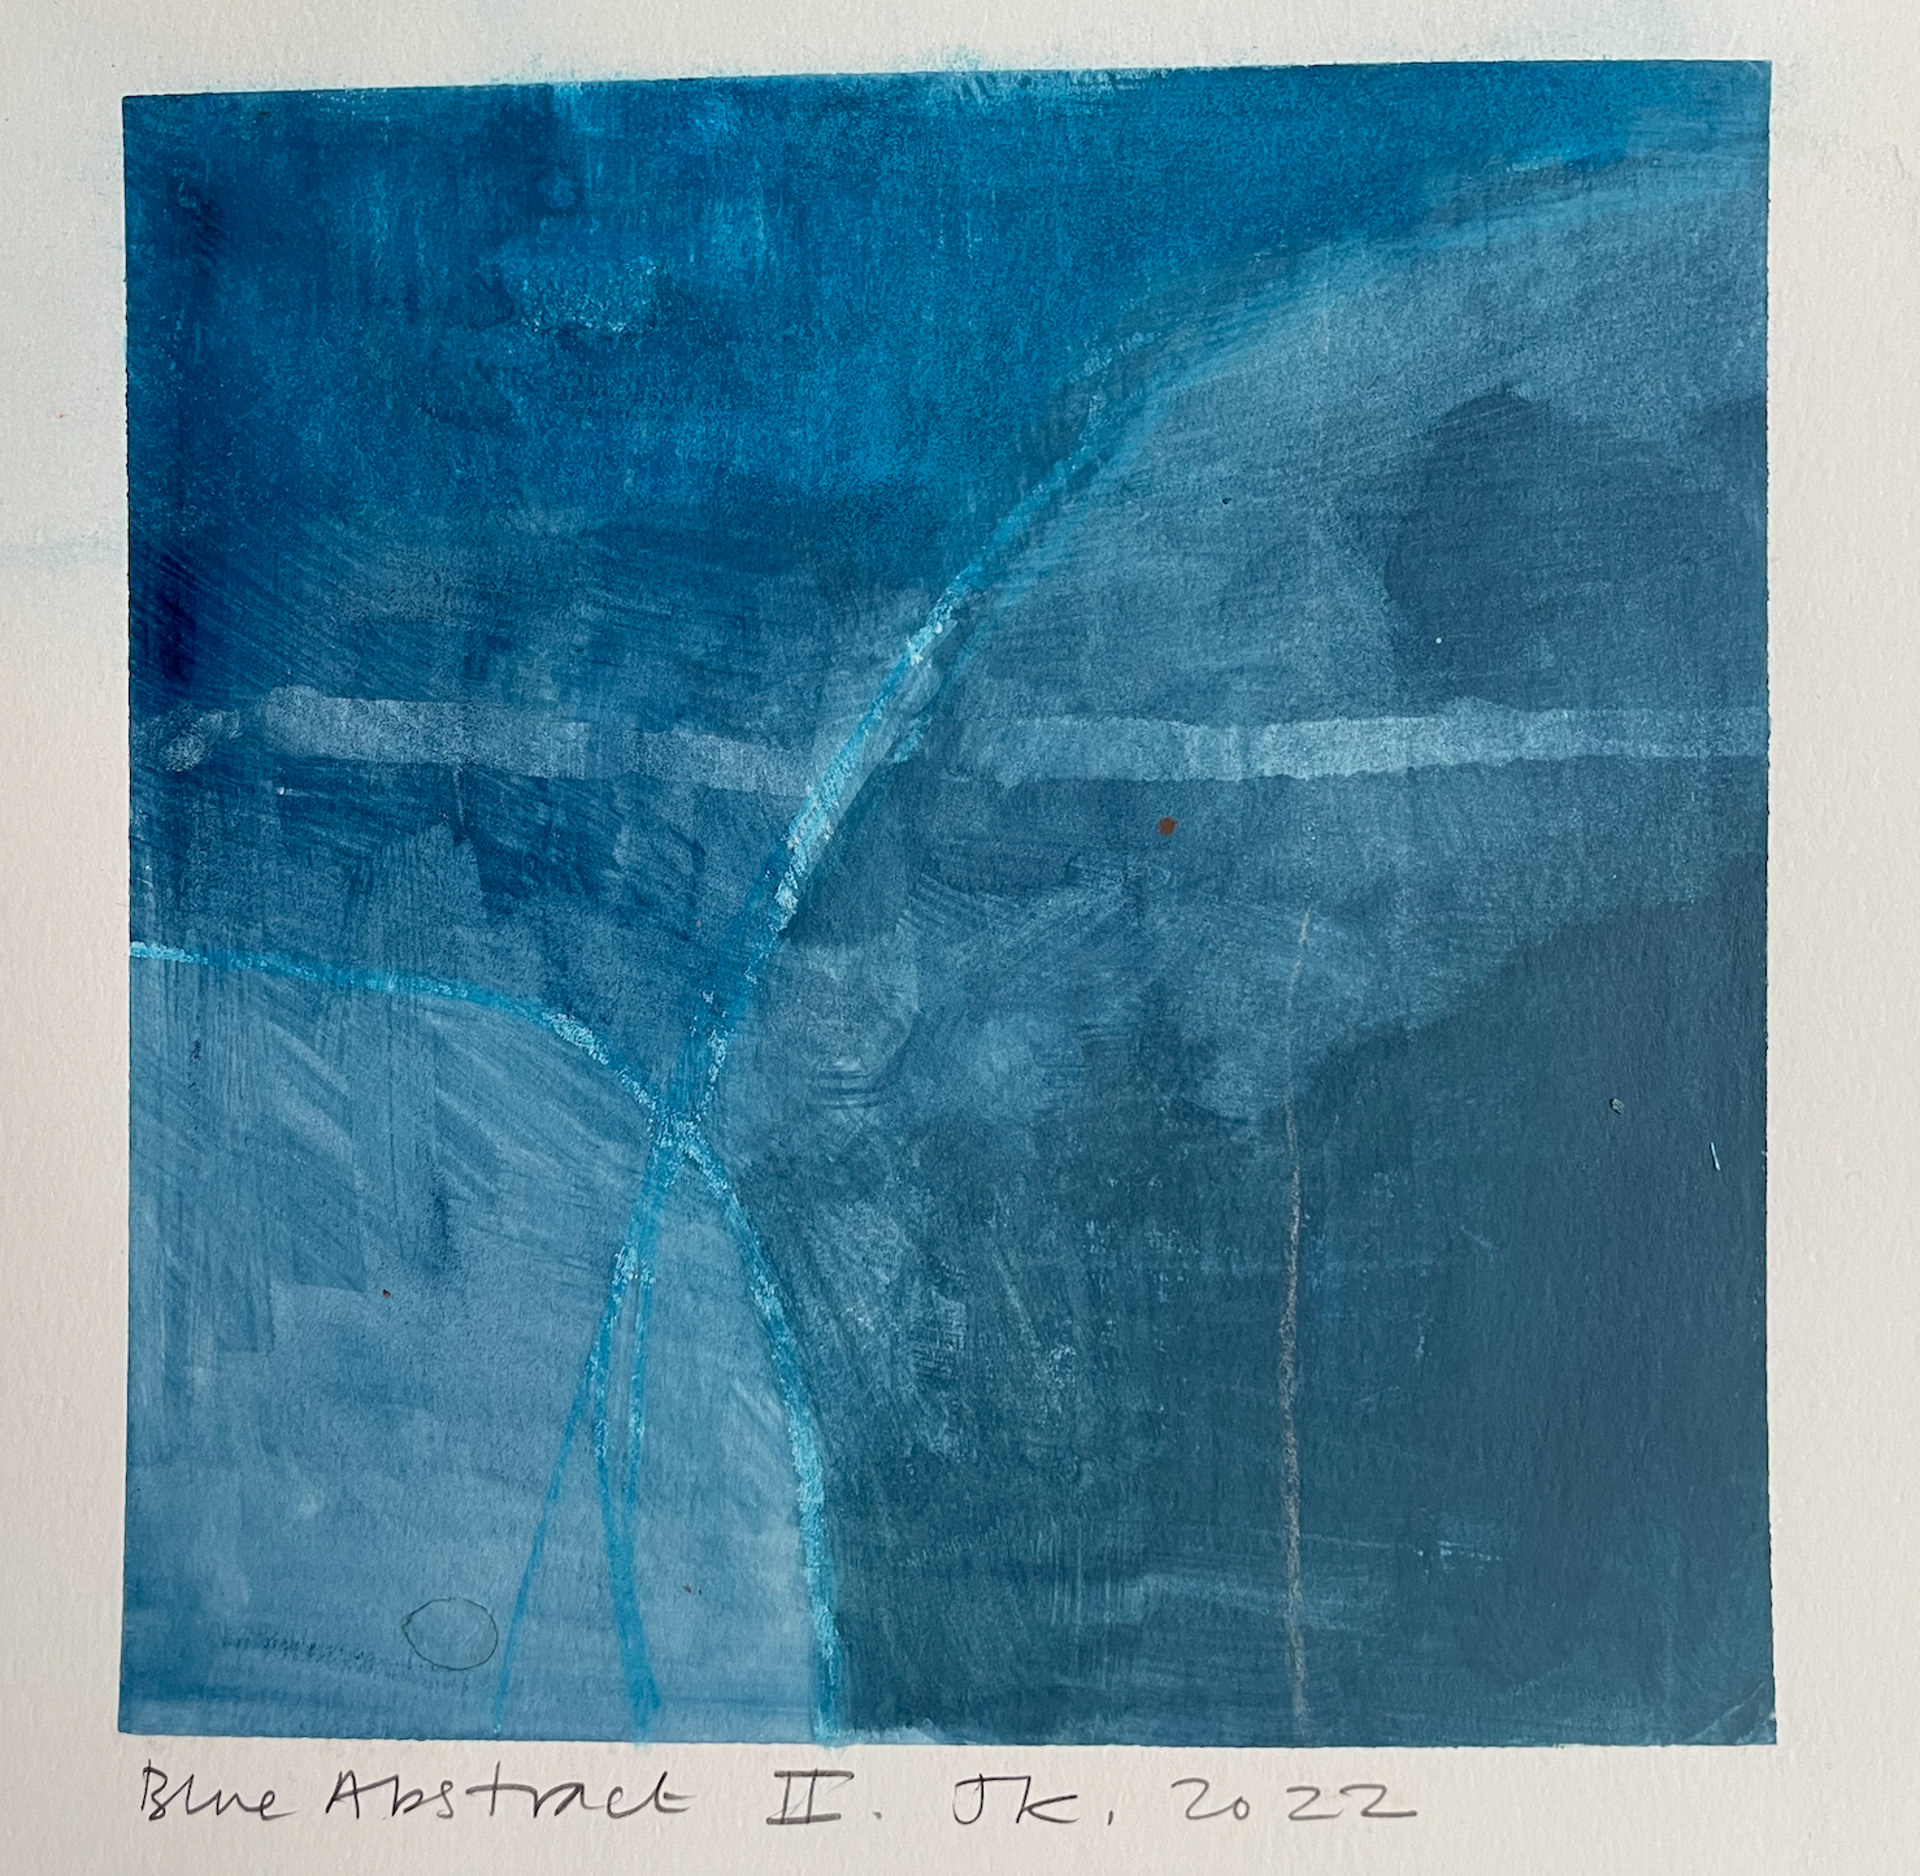 Blue Abstract II Study by Jane Kell